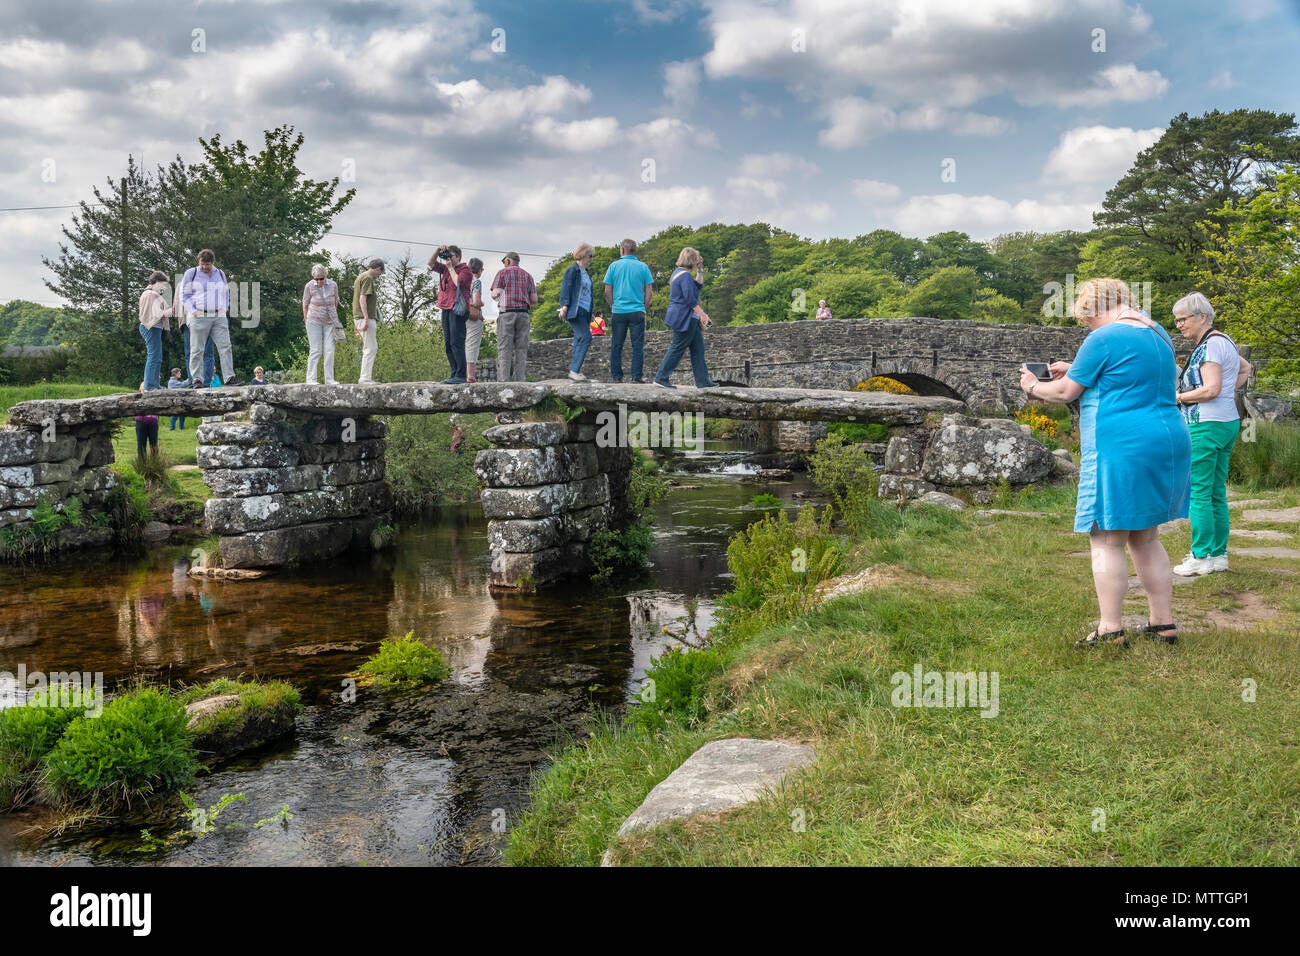 Another coach party descend upon the two ancient bridges at Postbridge in the Dartmoor National Park. Stock Photo